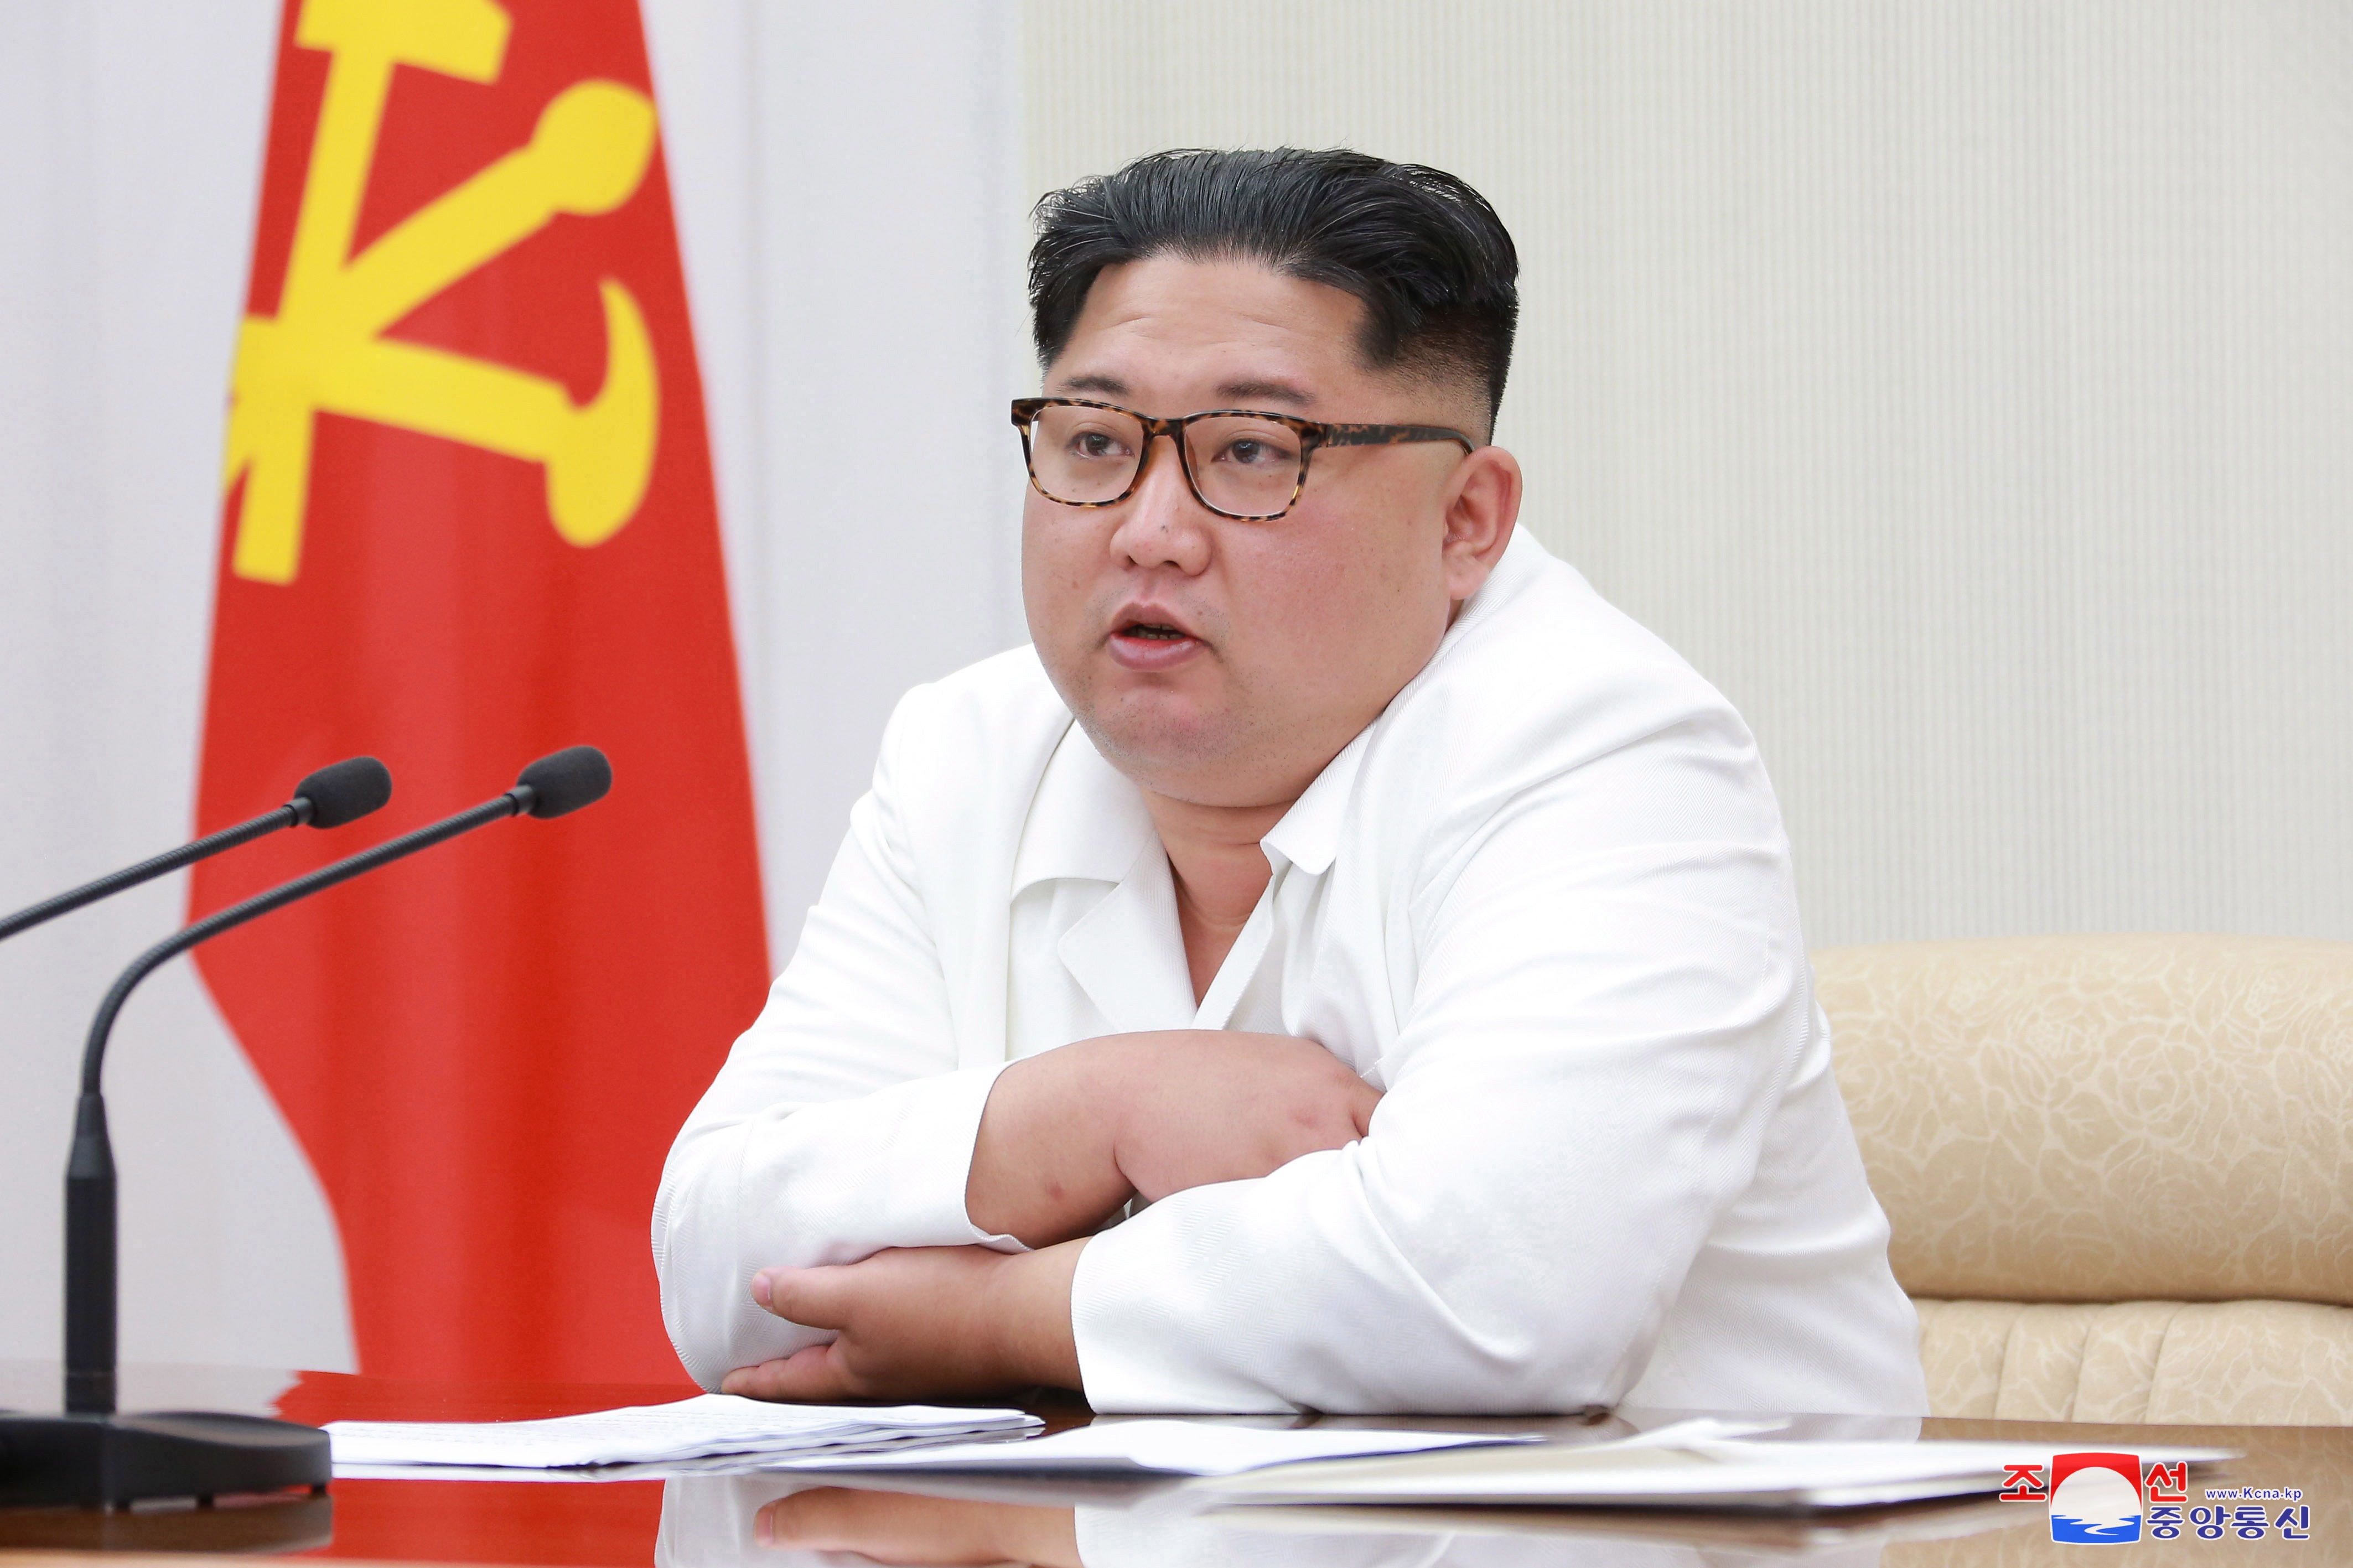 North Korean leader Kim Jong-un chairs a meeting of the 7th Central Military Commission of the Workers’ Party of Korea in Pyongyang on May 18.  It is quite possible Pyongyang has no intention of giving up its nuclear arms. Photo: EPA-EFE